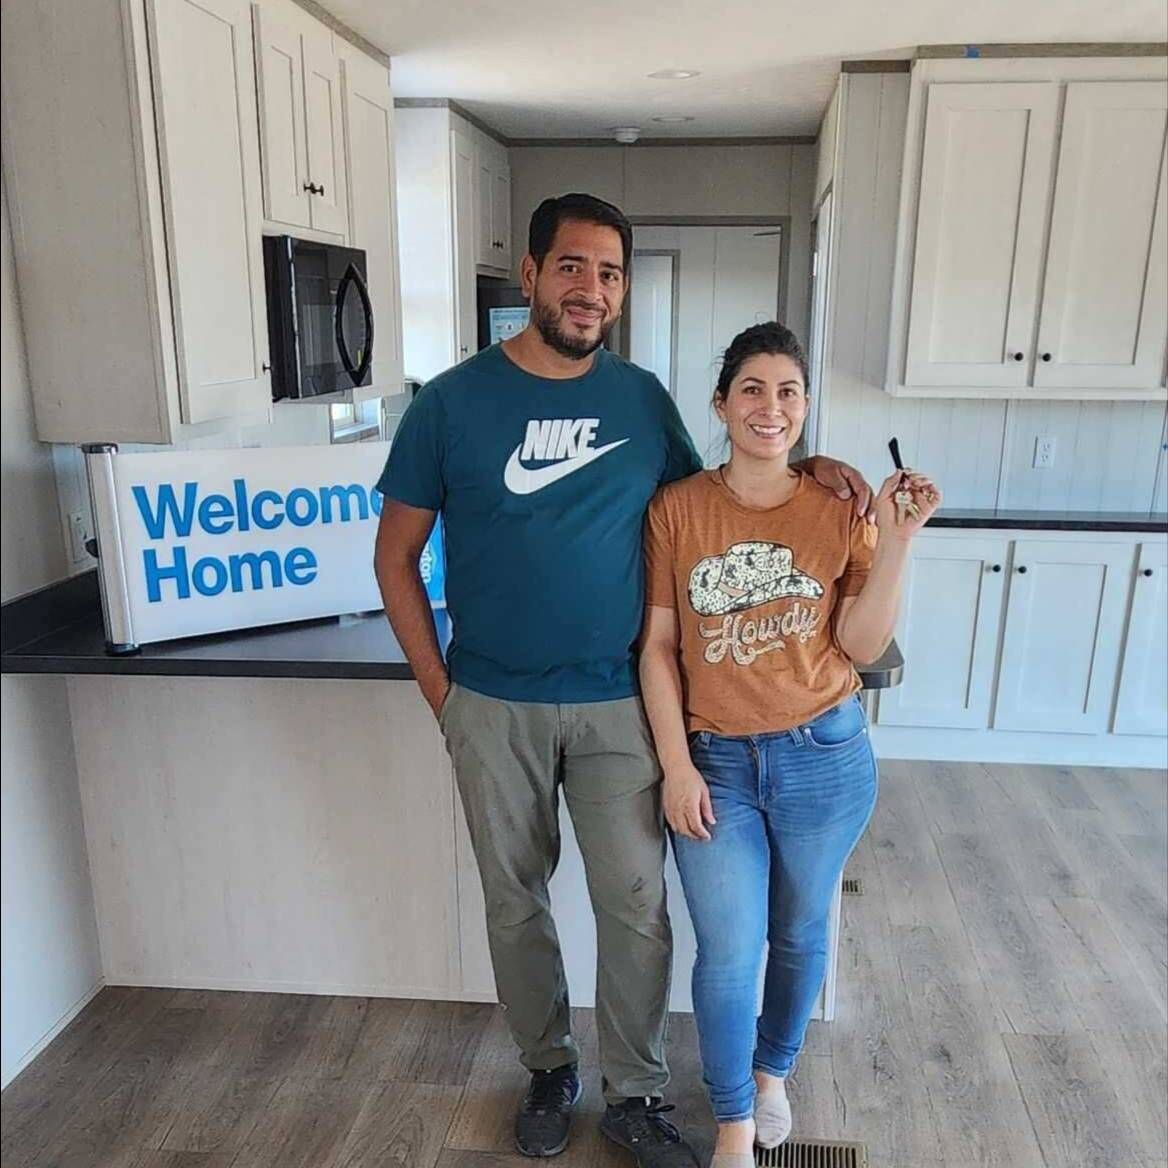 Juan H. welcome home image